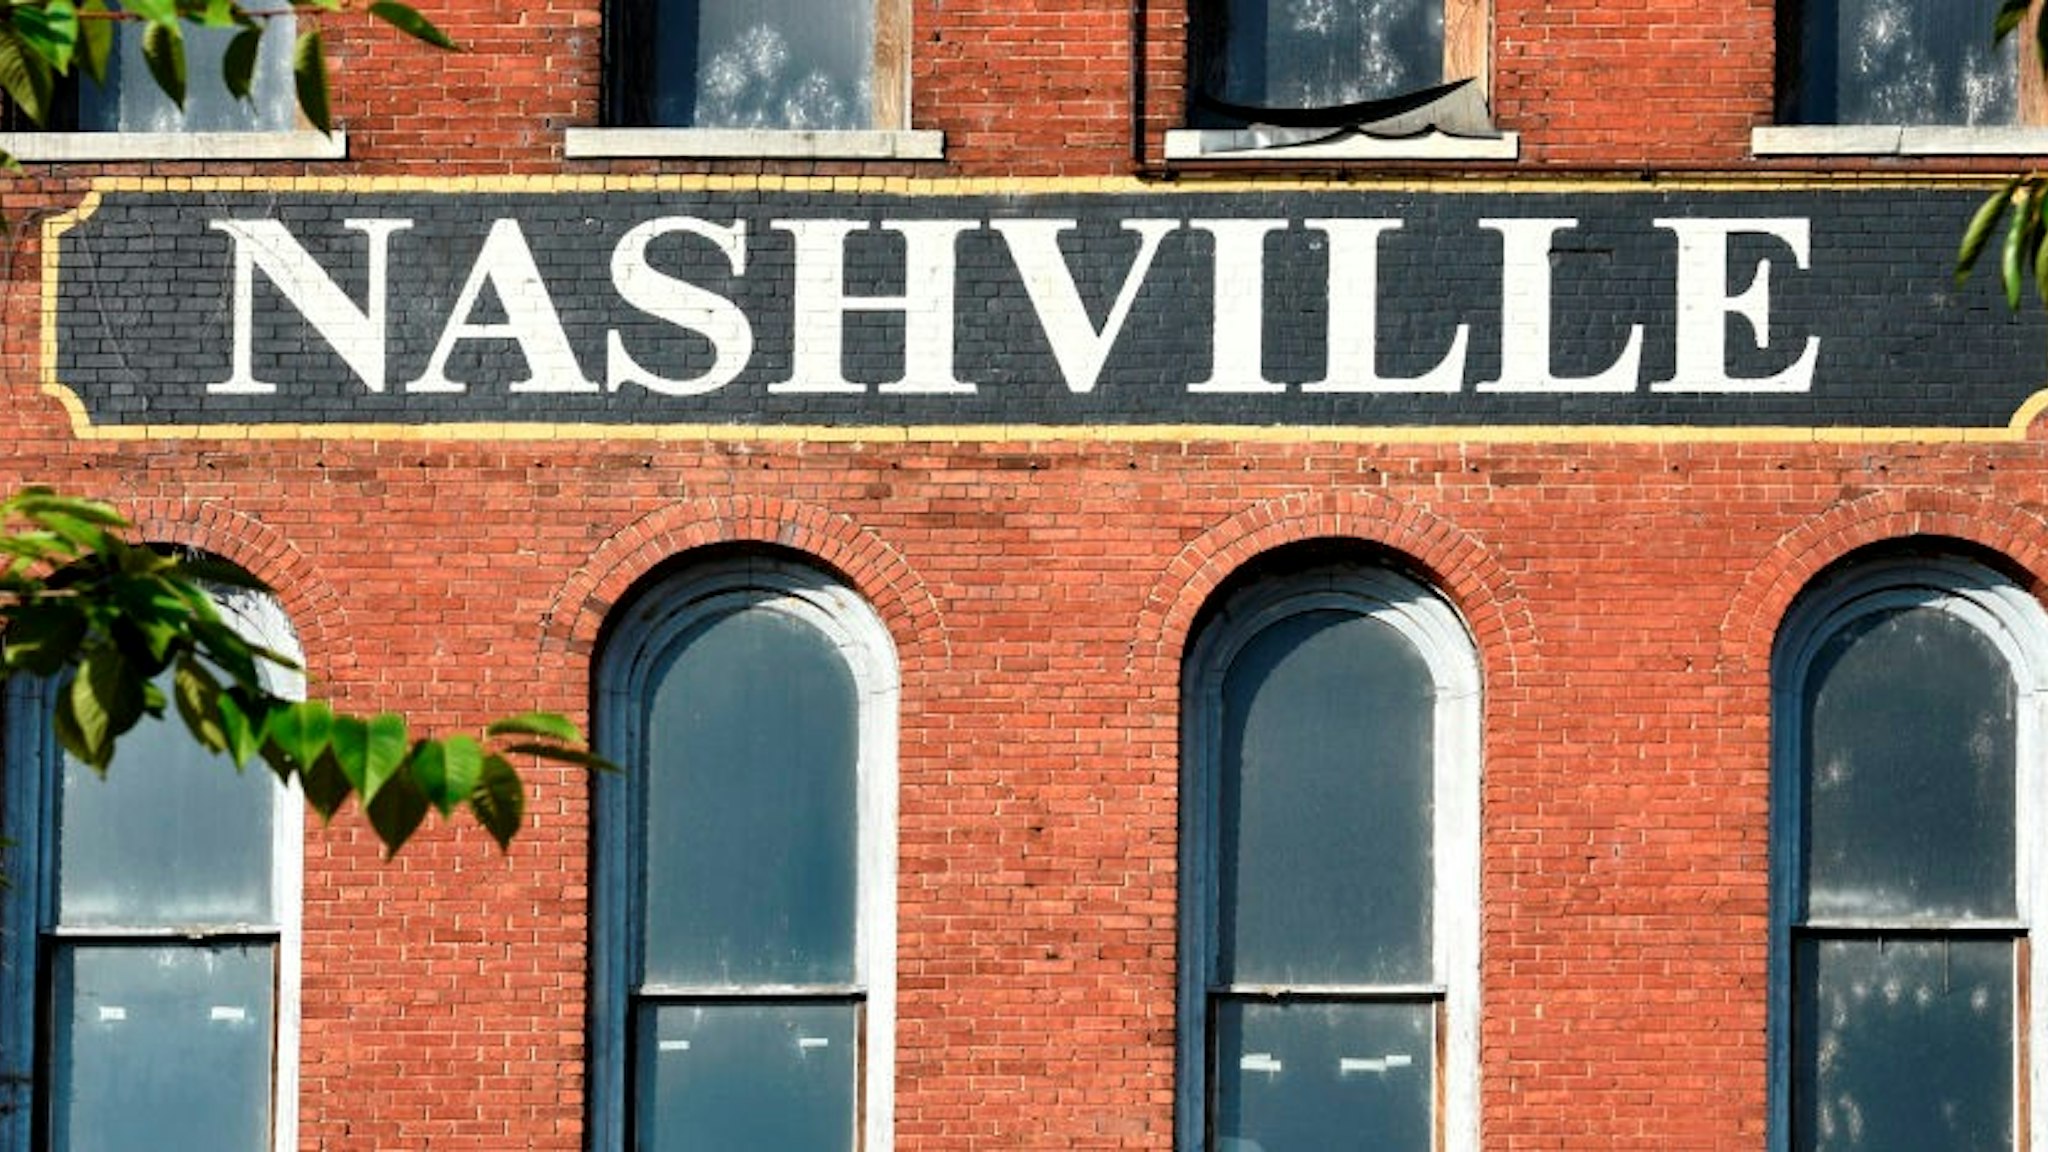 NASHVILLE, TENNESSEE - SEPTEMBER 2, 2019: The facade of a 19th century brick warehouse along the Cumberland River in downtown Nashville, Tennessee. (Photo by